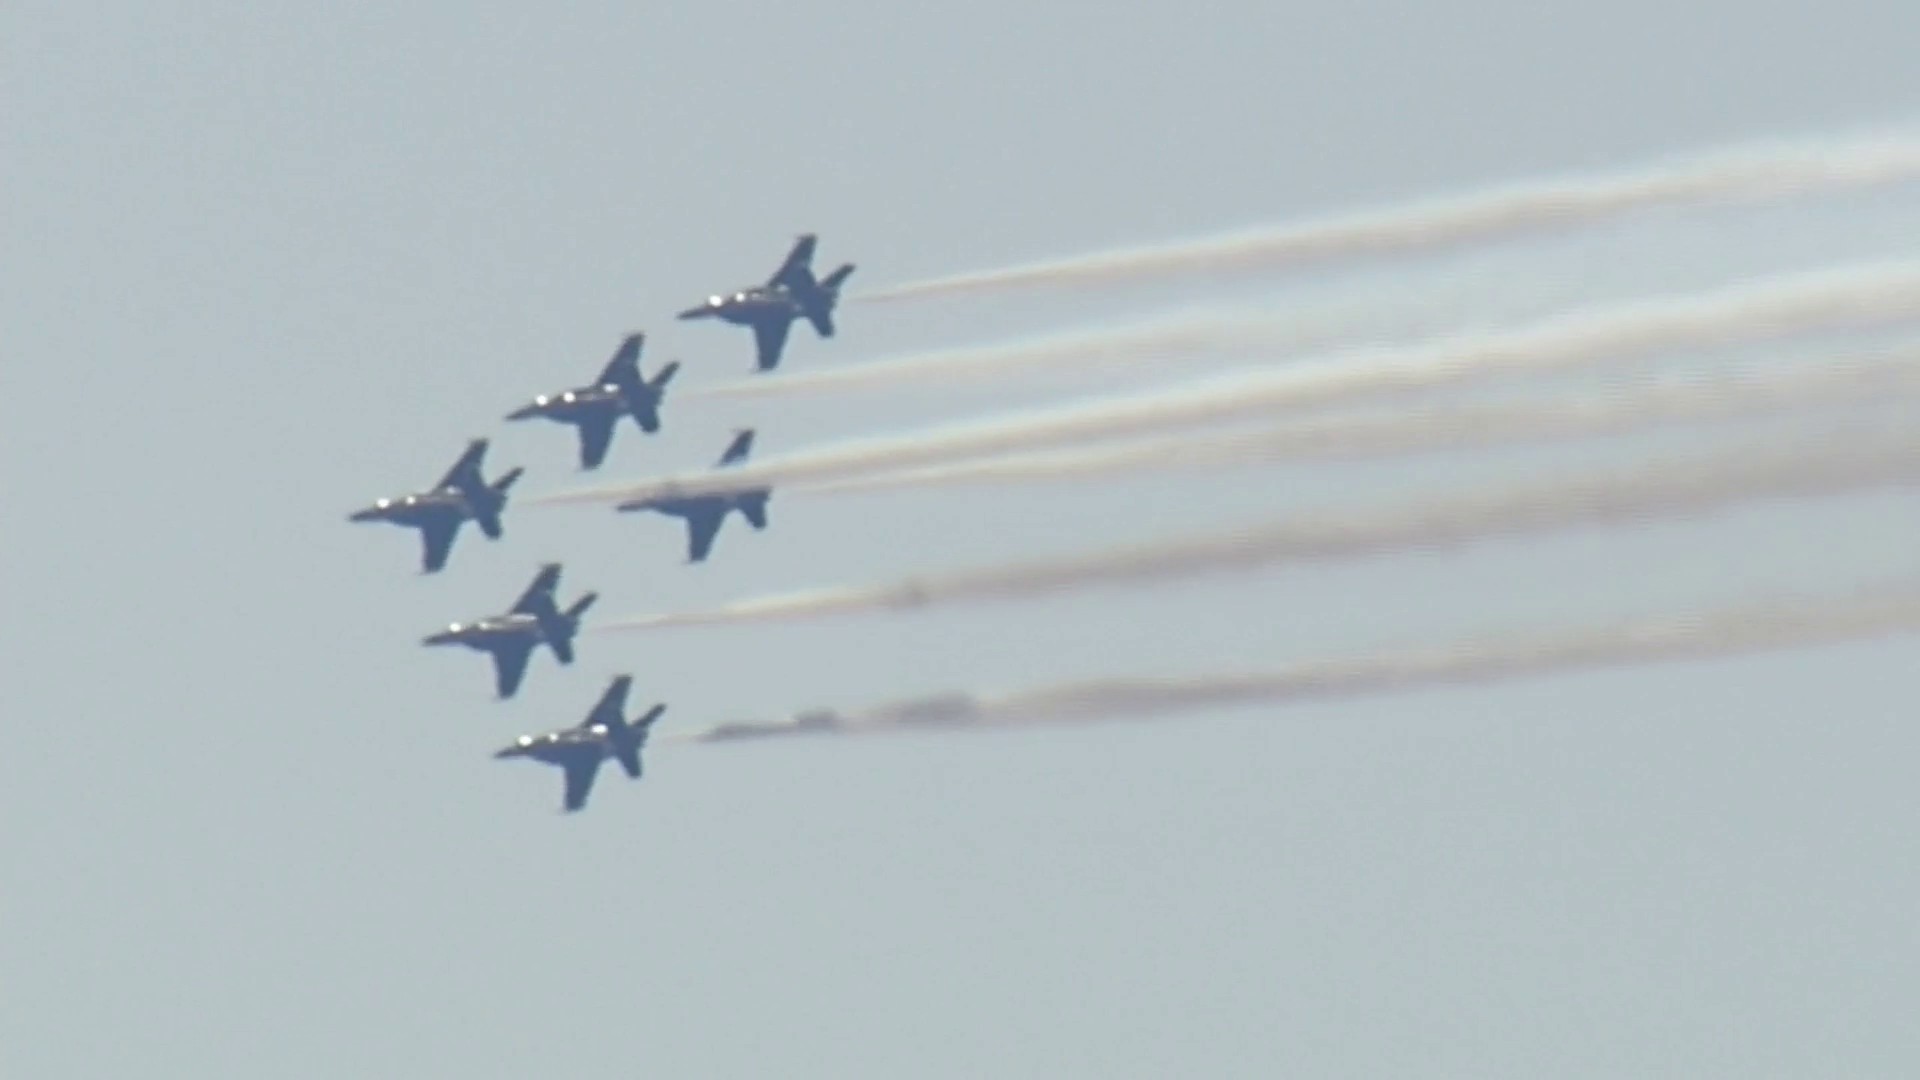 Watch: Highlights from Day 3 of San Francisco Fleet Week air shows